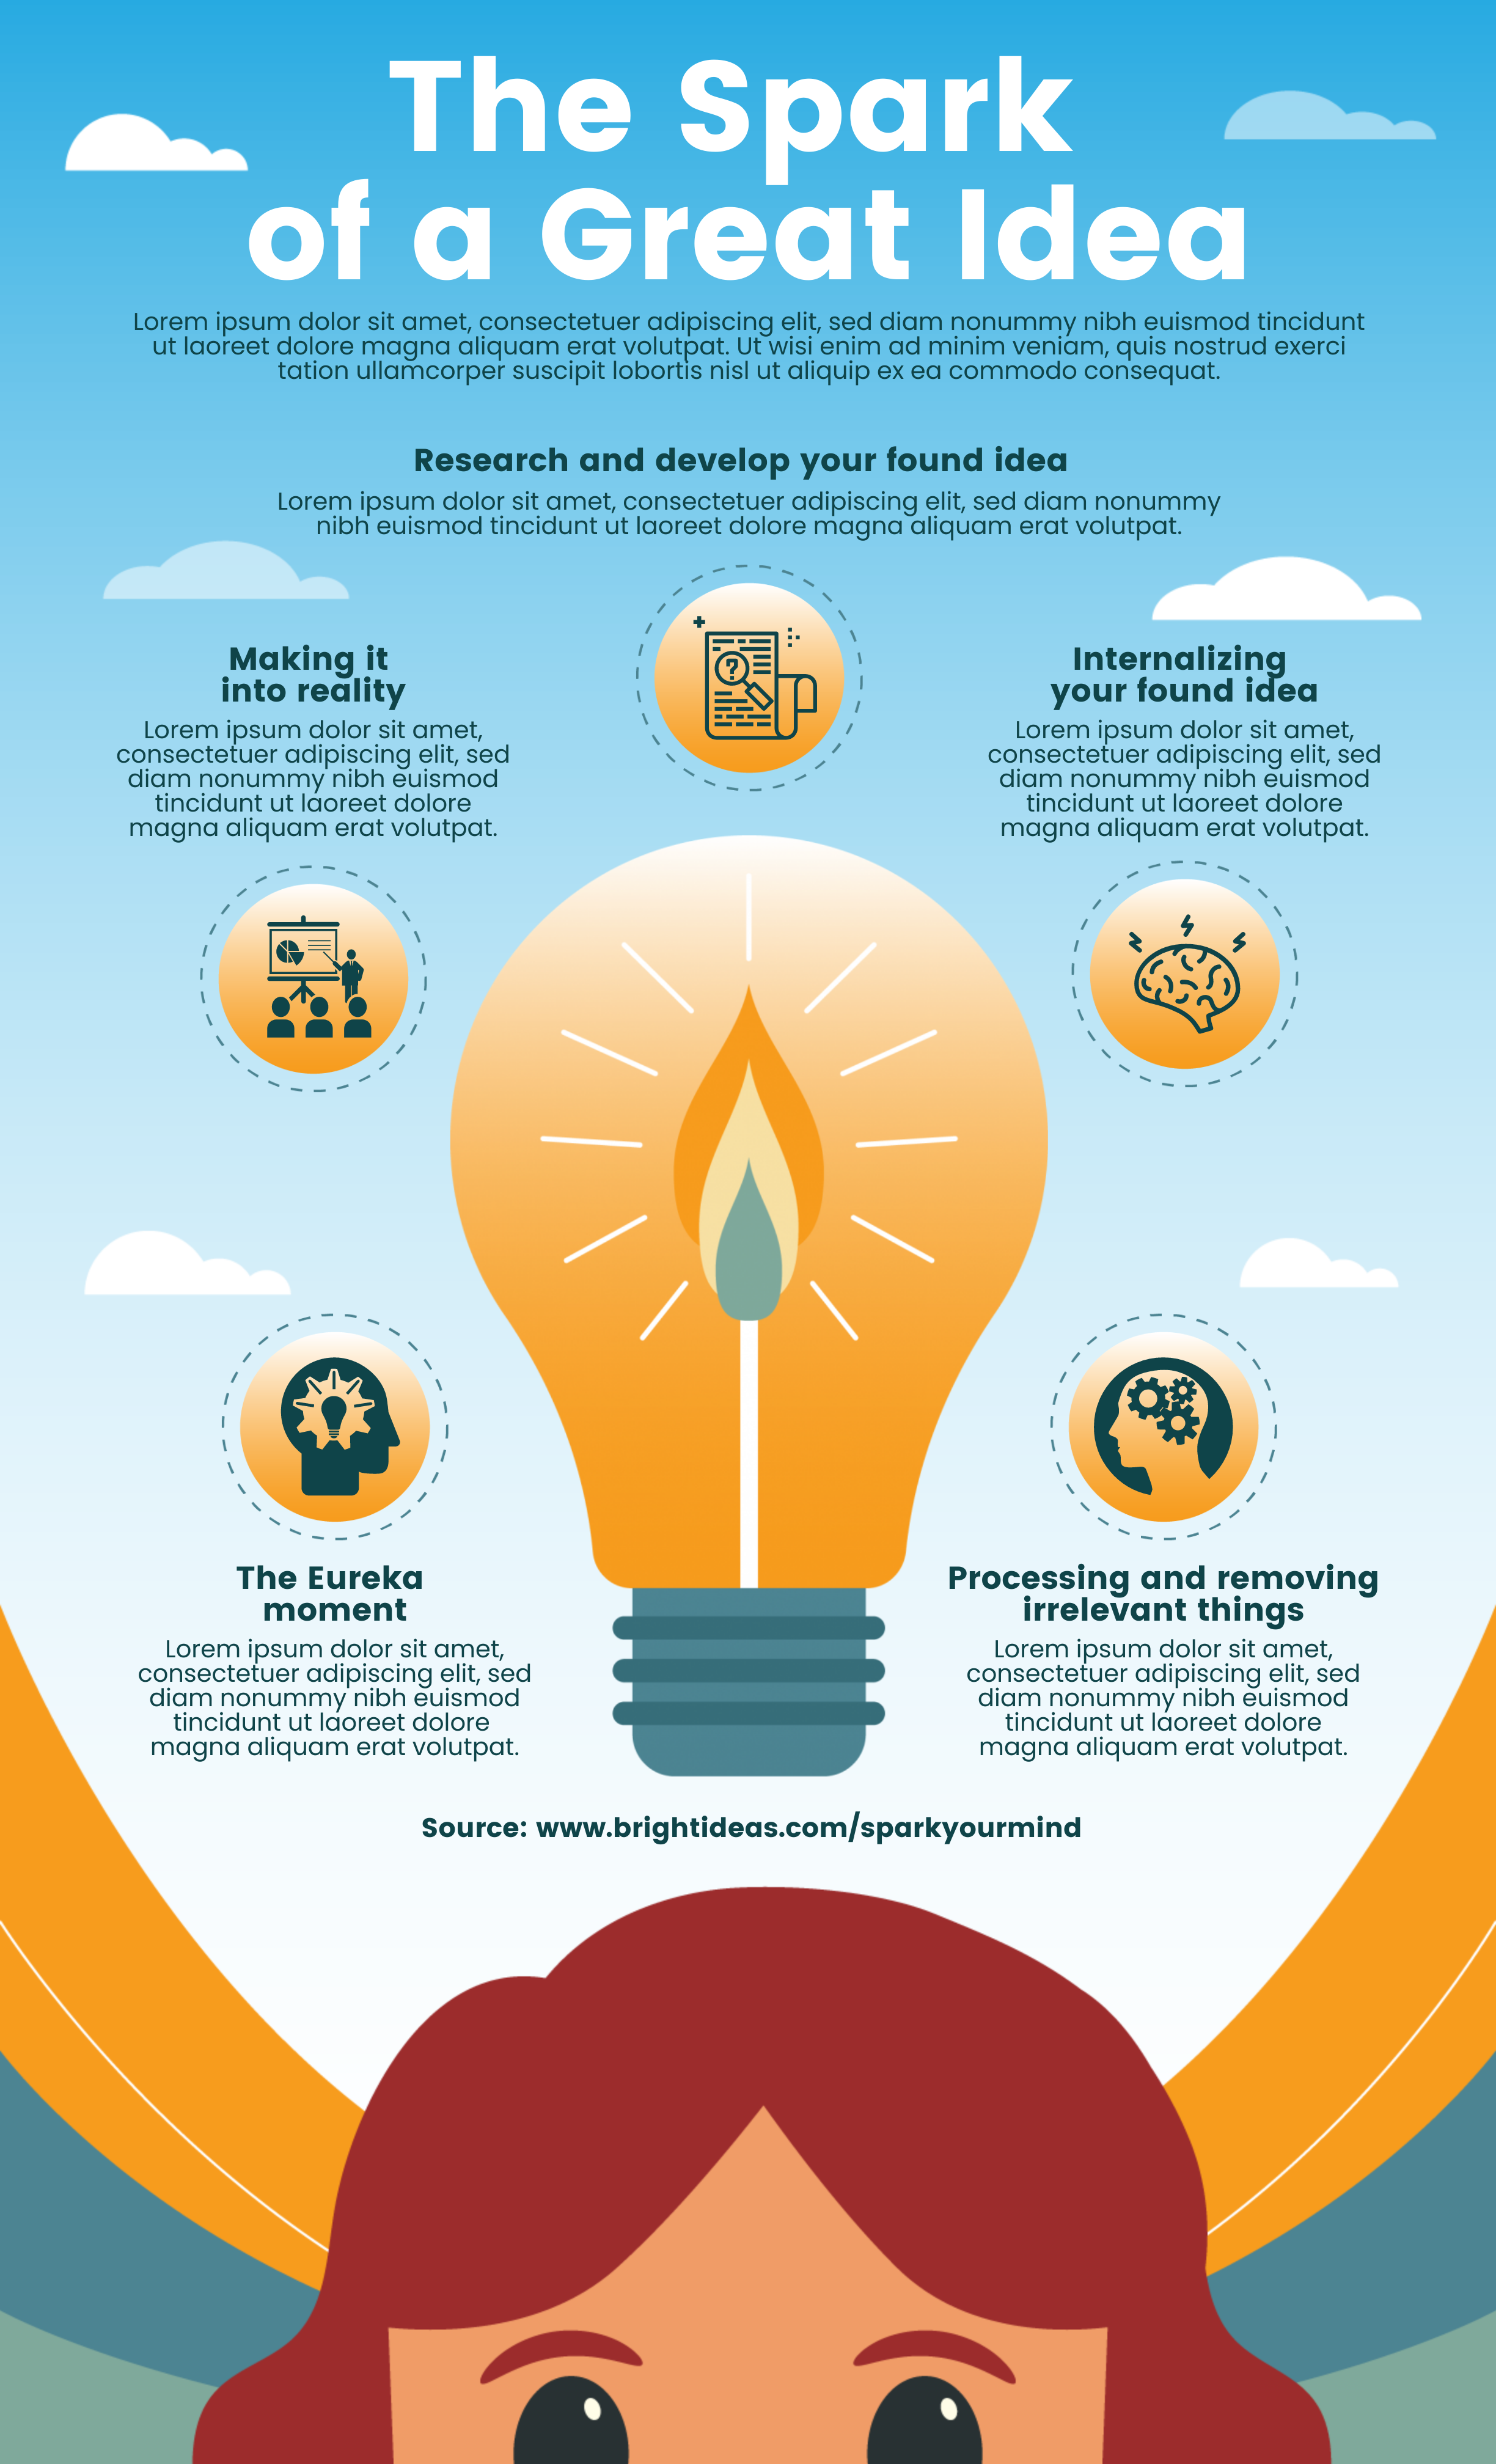 40 Infographic Ideas to Jumpstart your Creativity | Visual Learning Center by Visme